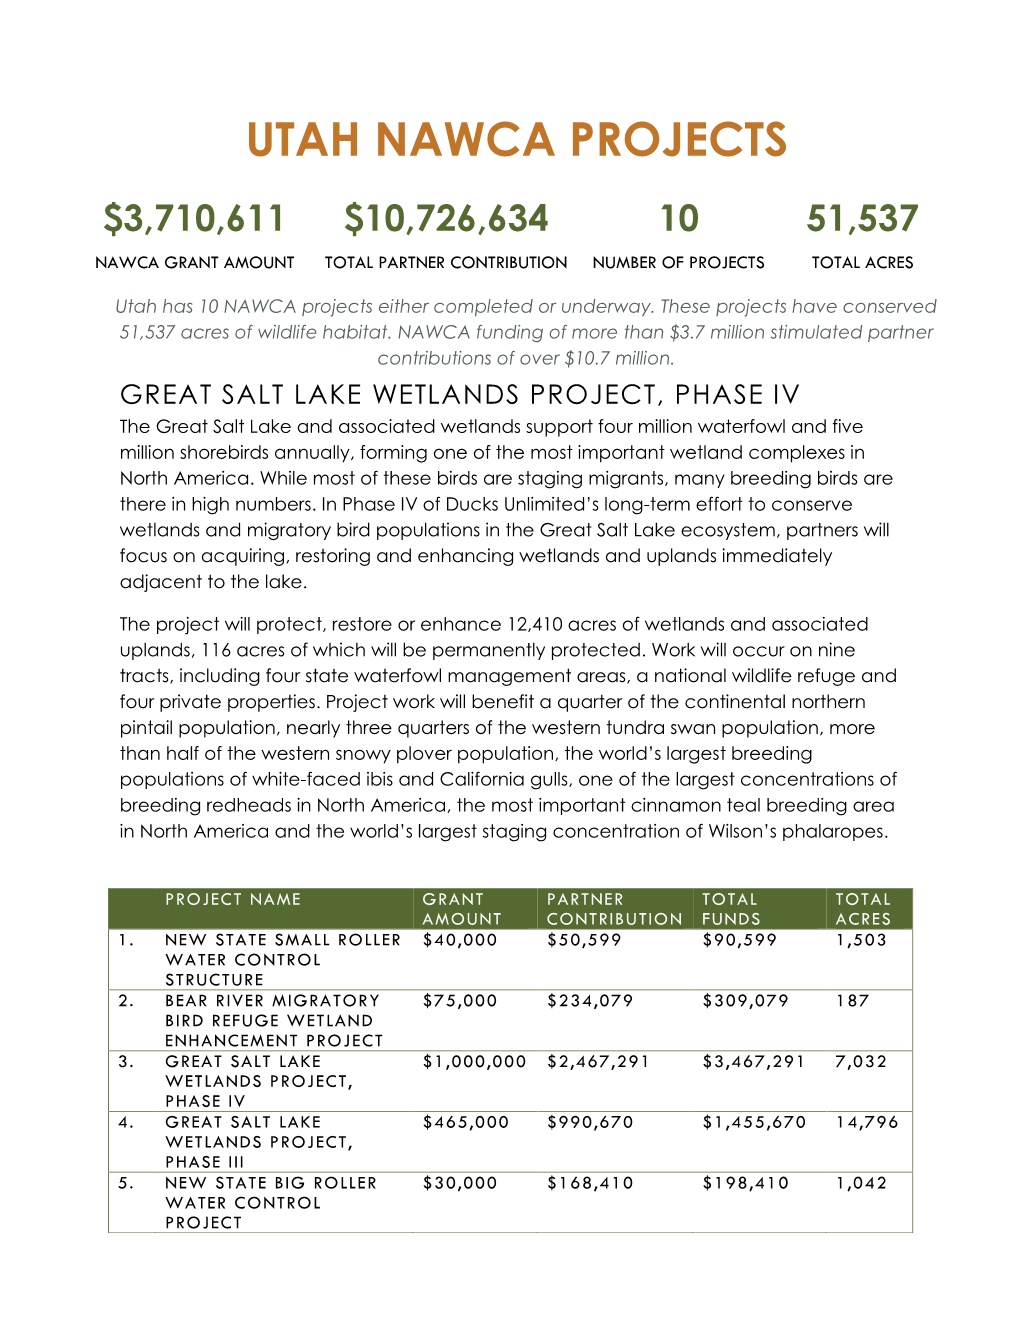 Utah Nawca Projects $3,710,611 $10,726,634 10 51,537 Nawca Grant Amount Total Partner Contribution Number of Projects Total Acres